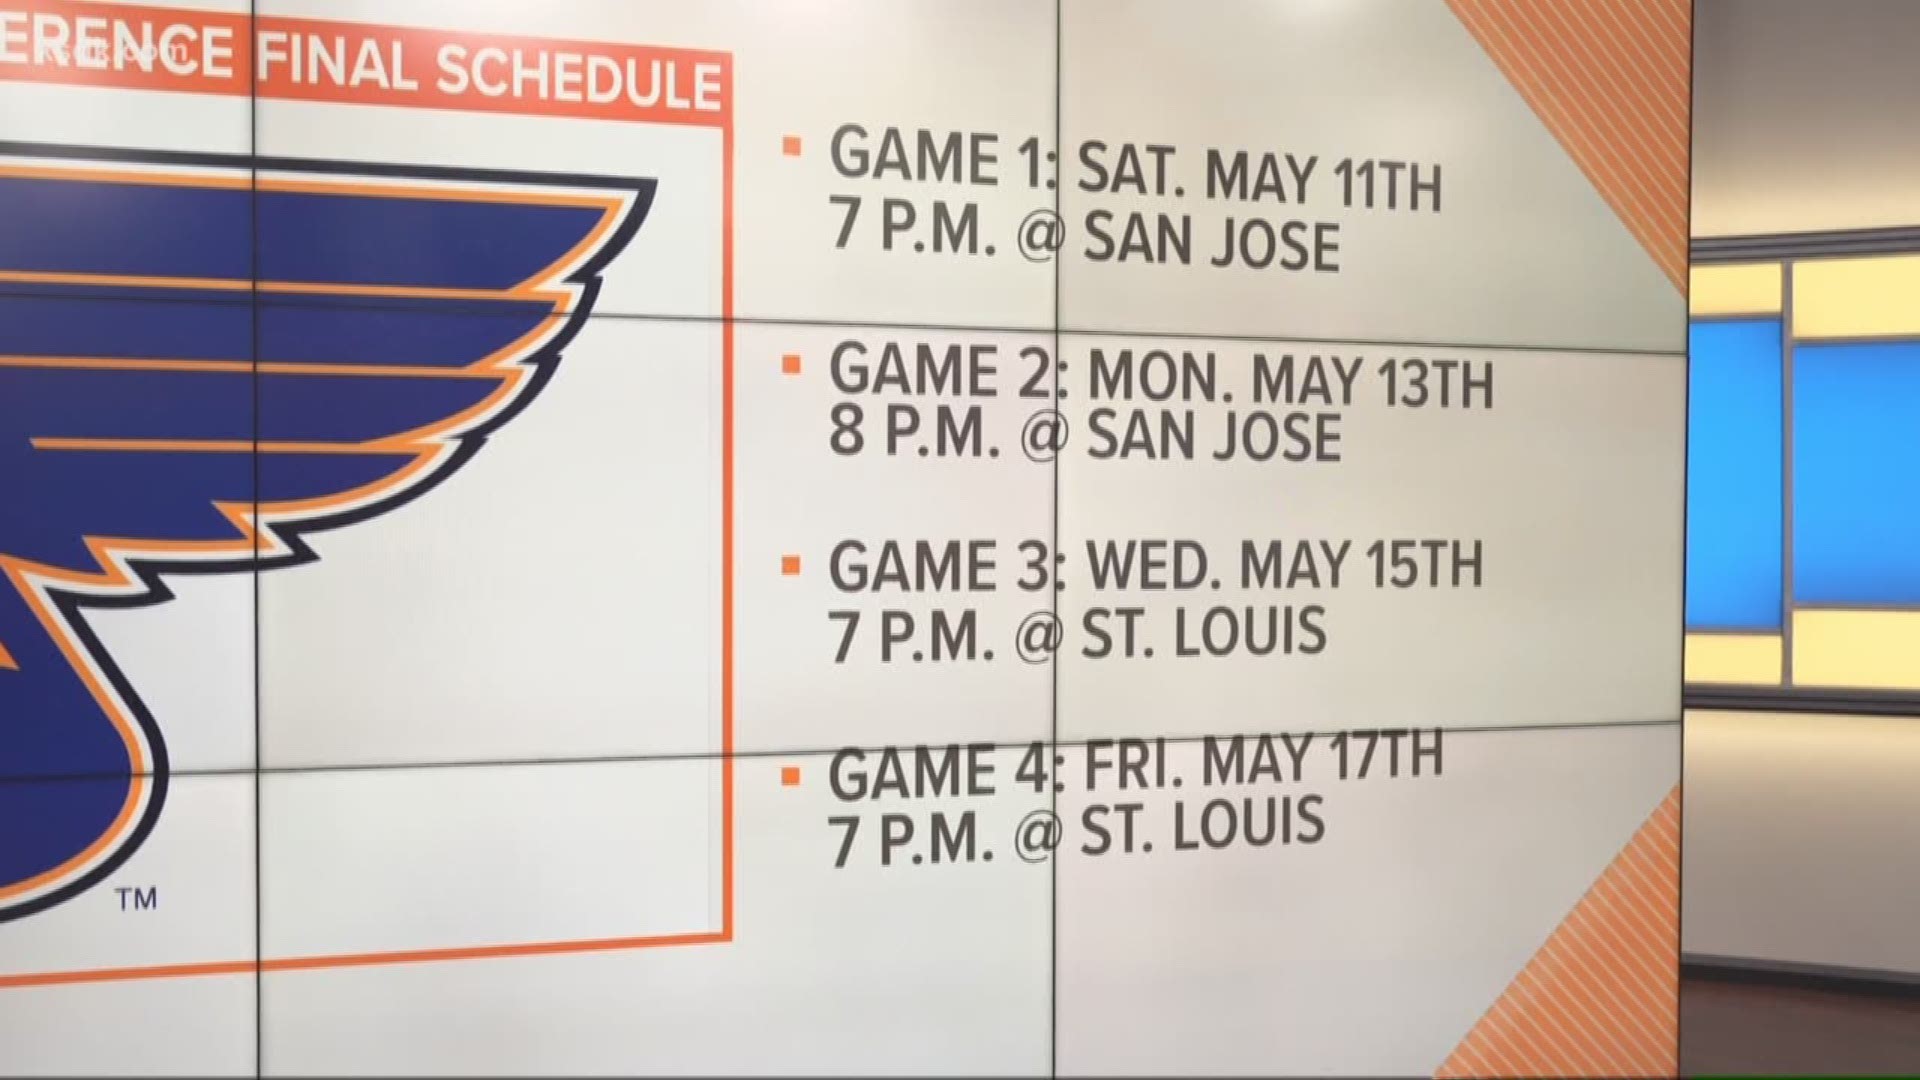 The first game will be on Saturday in San Jose.